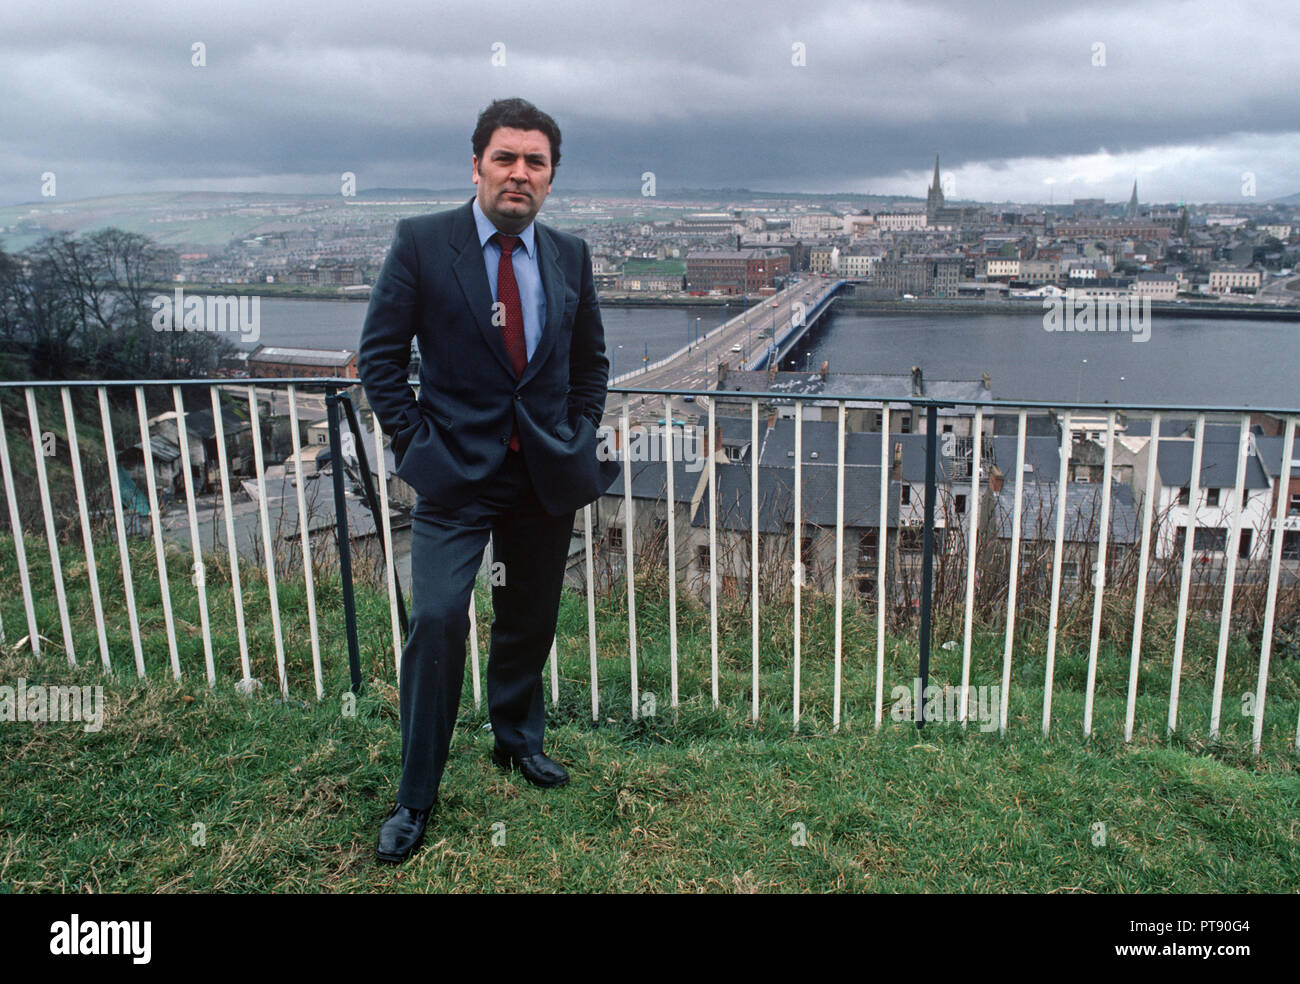 John Hume, Irish politician standing in front of Derry, Londonderry, Northern Ireland. Former leader of the Social Democratic and Labour Party of Northern Ireland. Served as a Member of the European Parliament and a Member of the UK Parliament, as well as a member of the Northern Ireland Assembly. Co-recipient of the 1998 Nobel Peace Prize, with David Trimble. 1980s Stock Photo